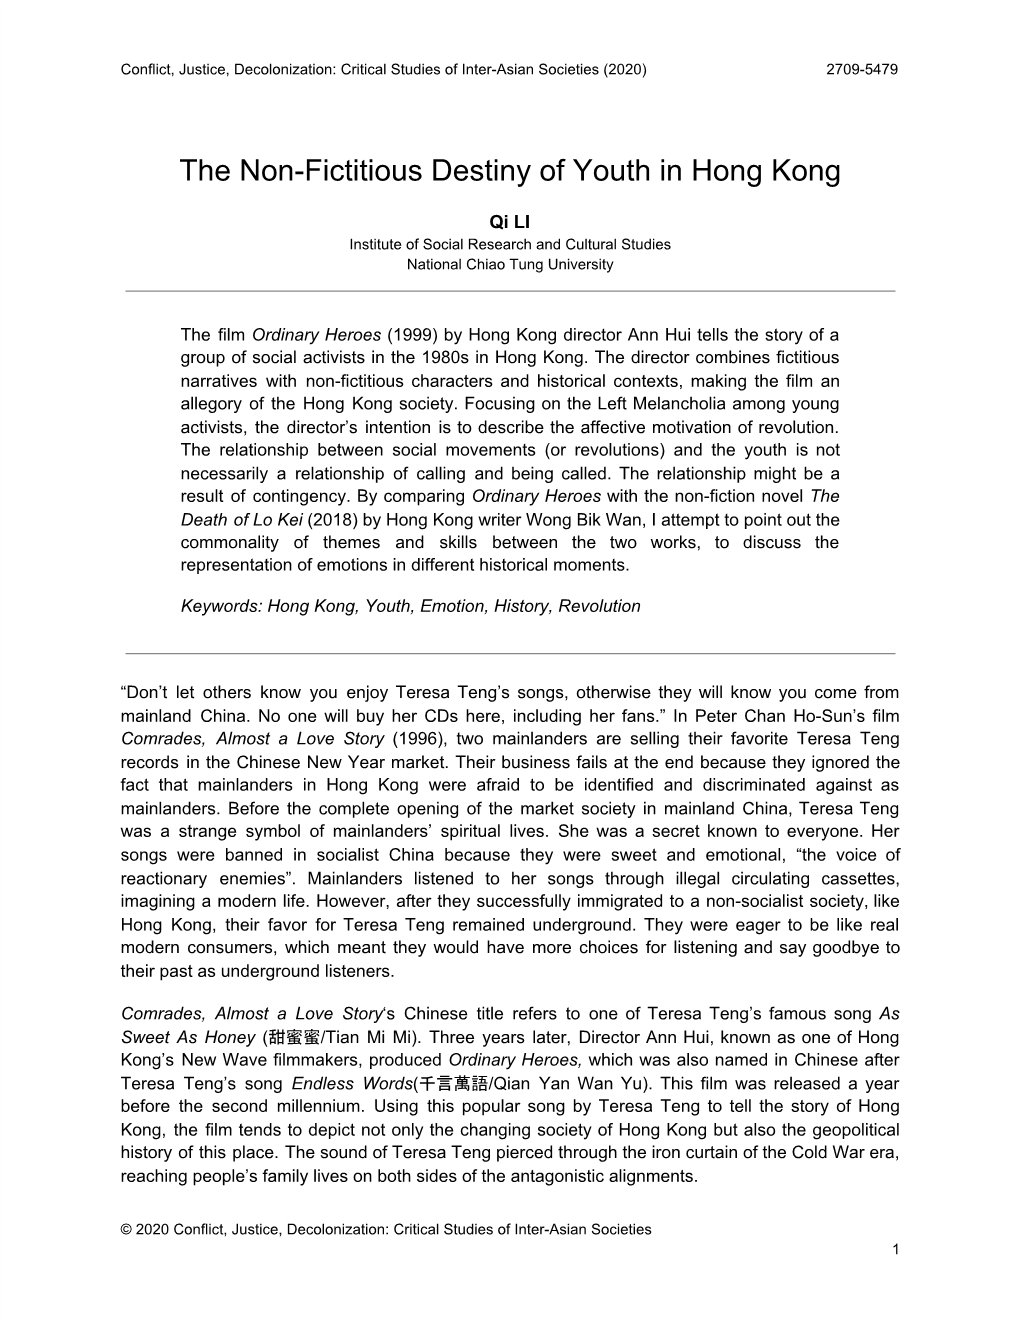 The Non-Fictitious Destiny of Youth in Hong Kong